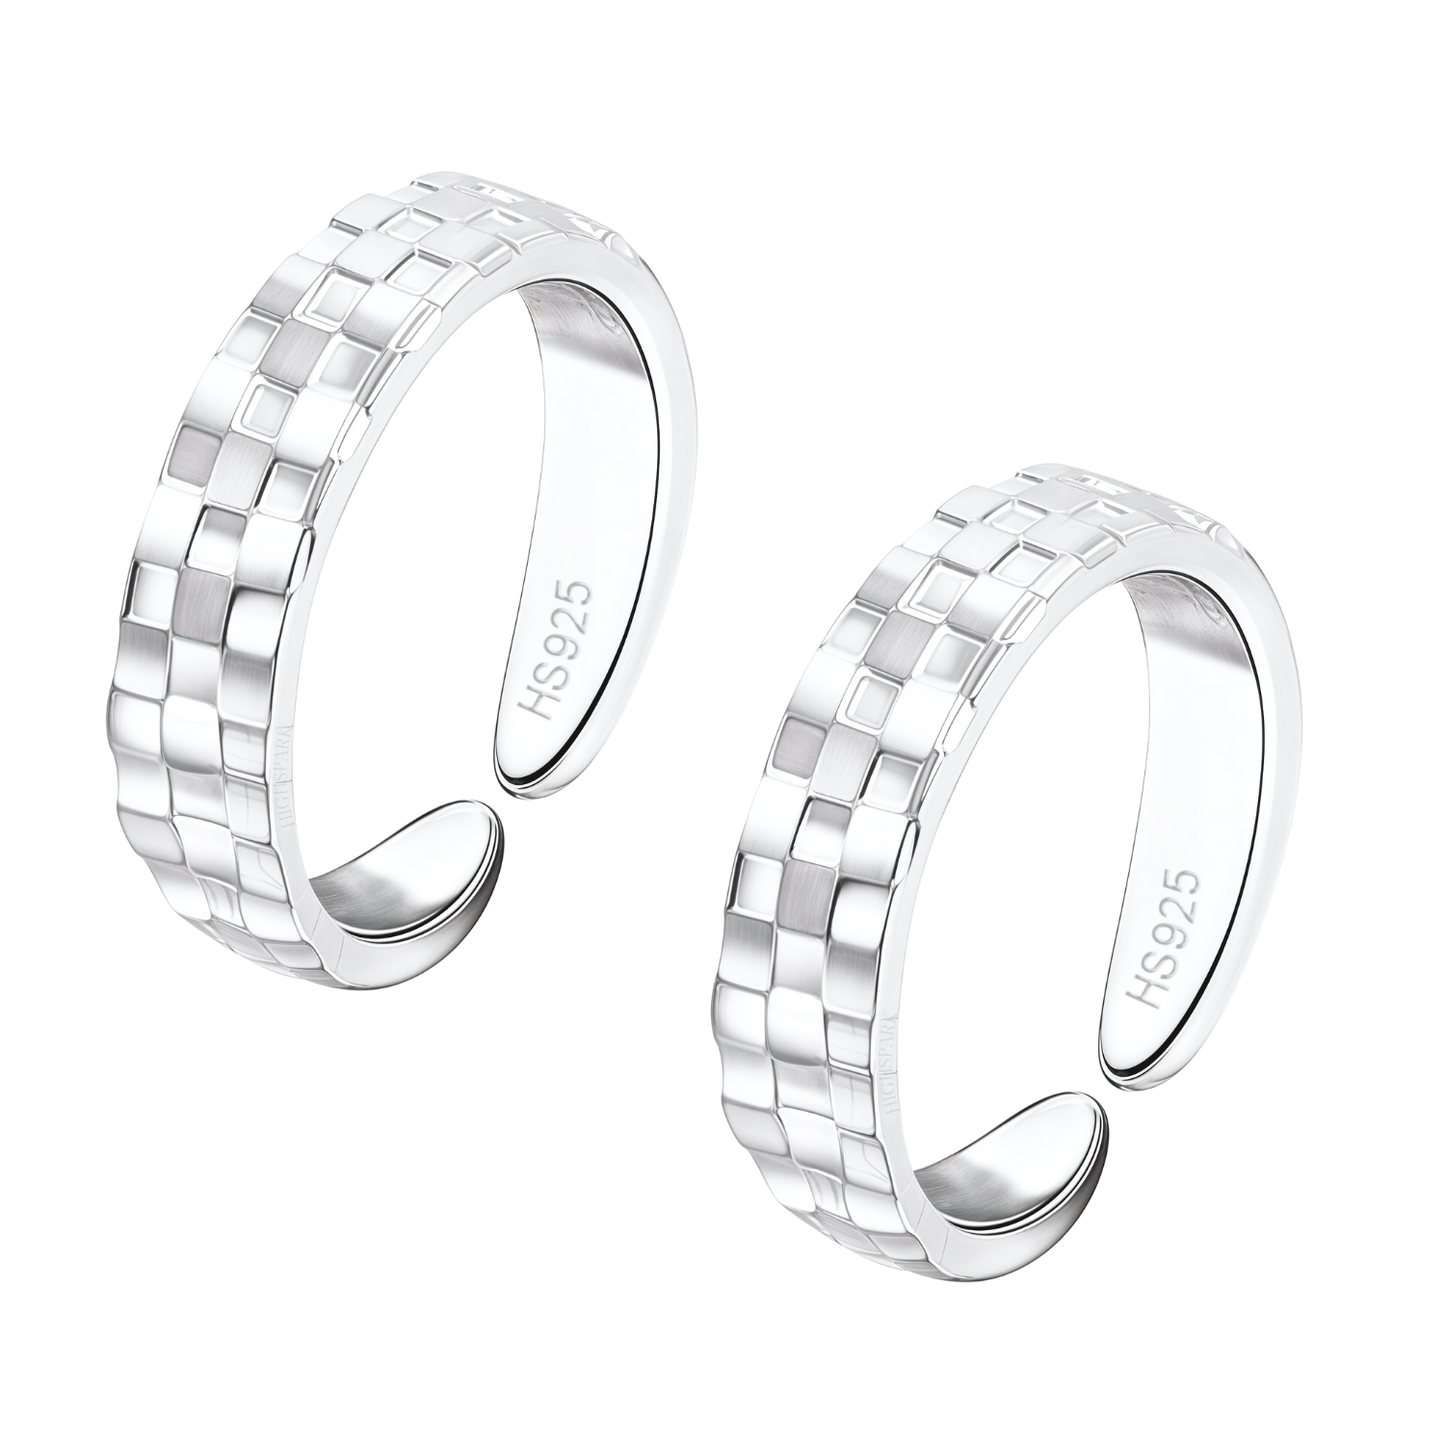 Checkered Embossed Toe Rings - Band Rings - 925 Sterling Silver - 2 Pieces